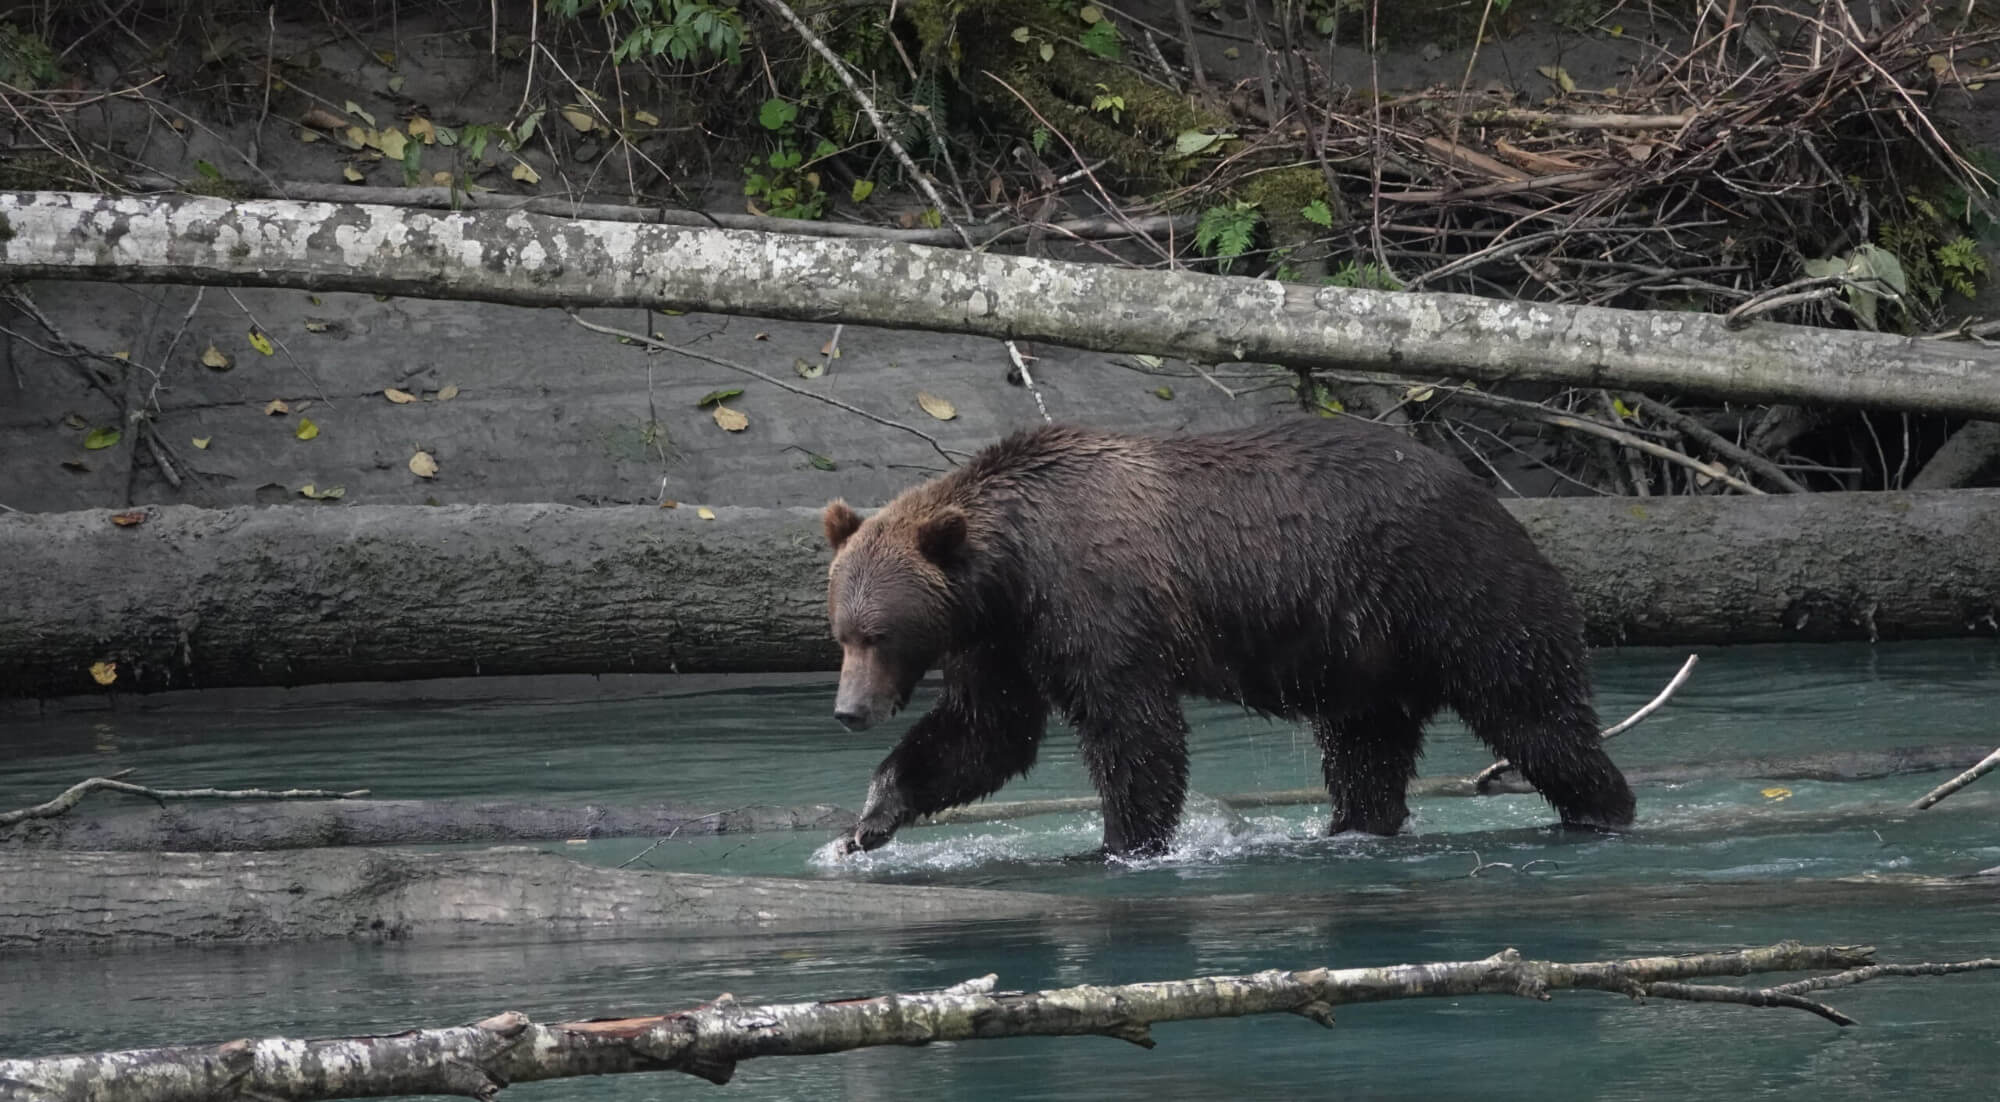 Grizzly Bear walking through shallow water between fallen trees